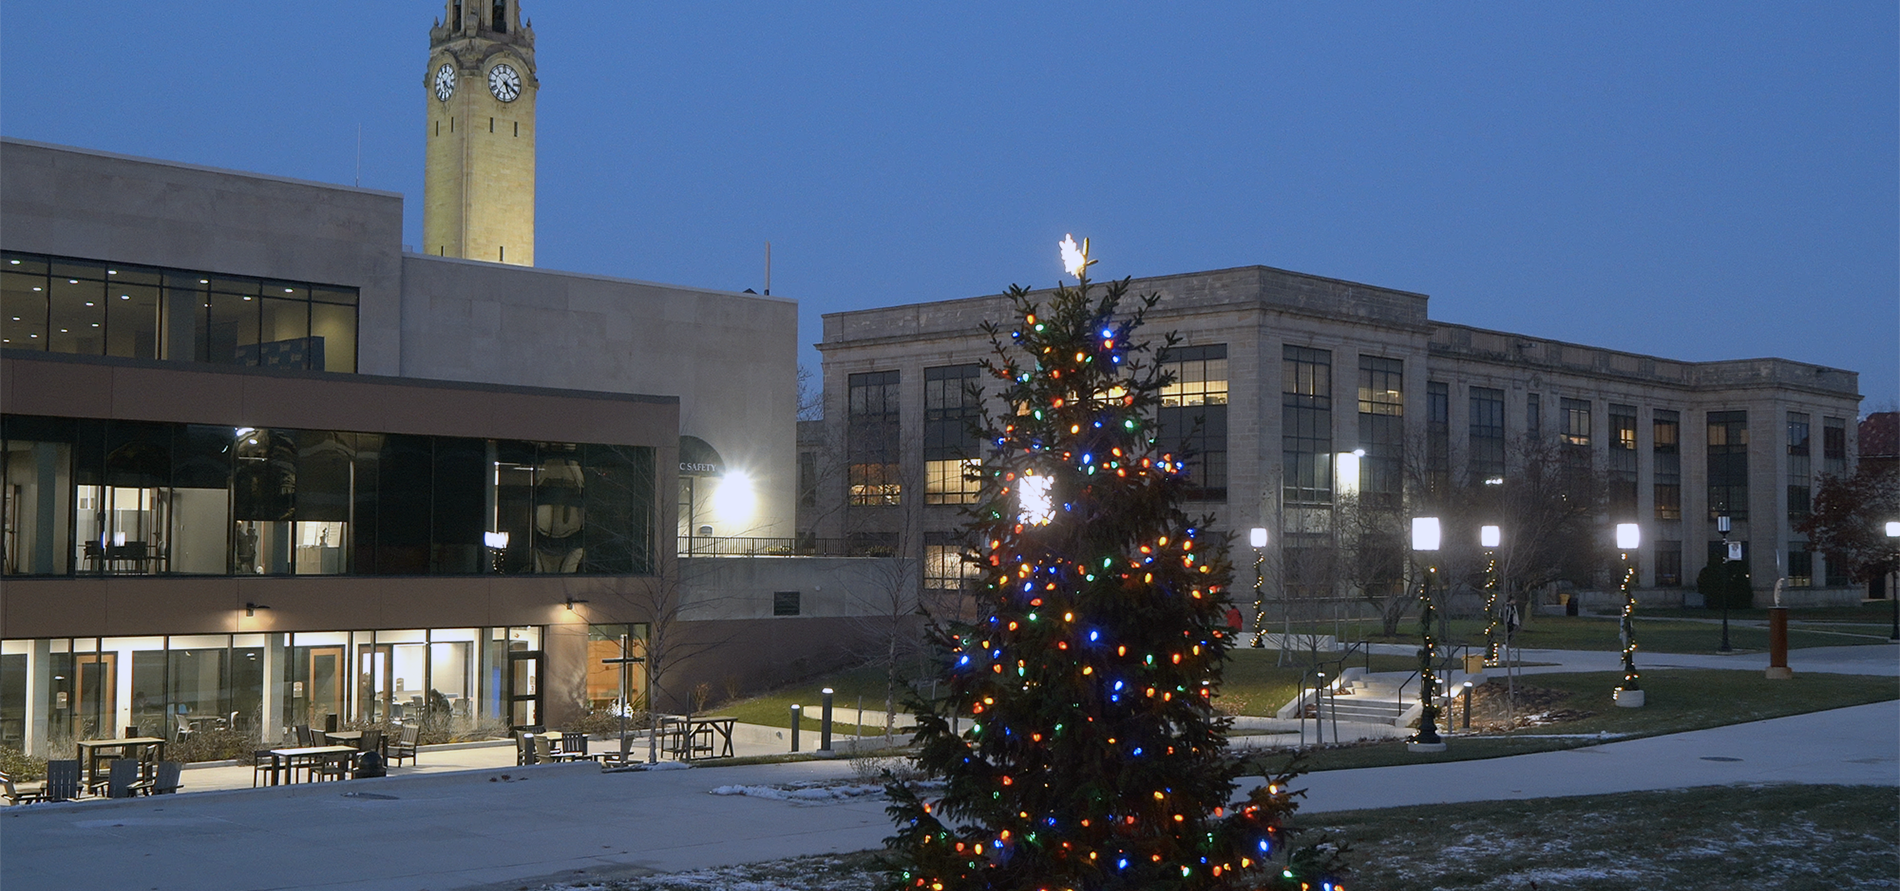 A fern tree on the McNichols Campus is covered in Christmas lights. The Student Union, Engineering Building and Clocktower are visible in the background.